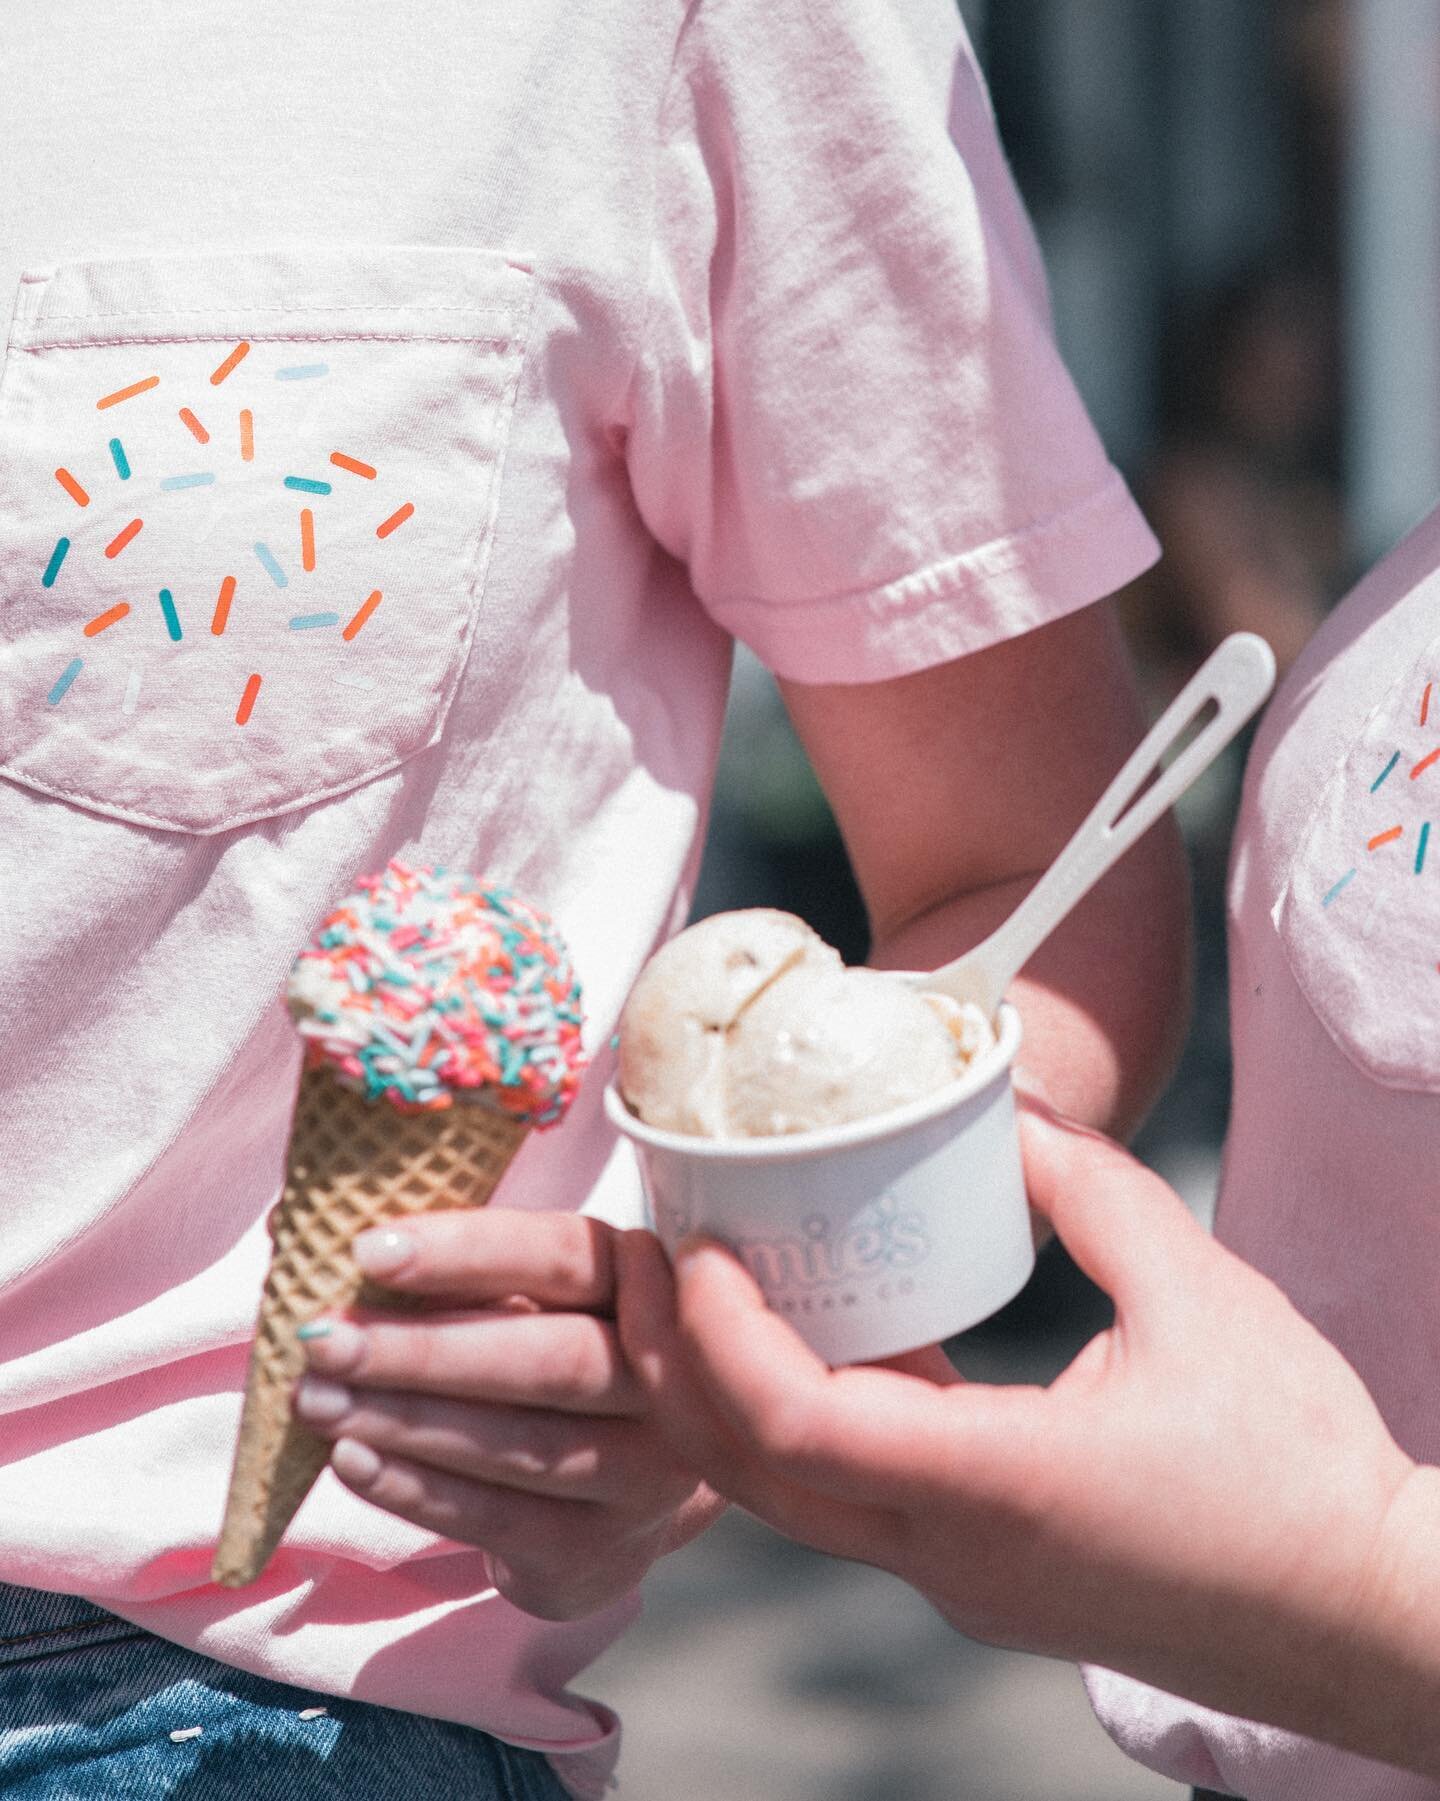 YOU ASKED, WE DELIVERED! We finally have TEES! 🥳 The pink (of course 😌) pocket tee features our signature sprinkles in the front &amp; our logo in the back! Available in sizes S-2XL. Pick one up this weekend !!!